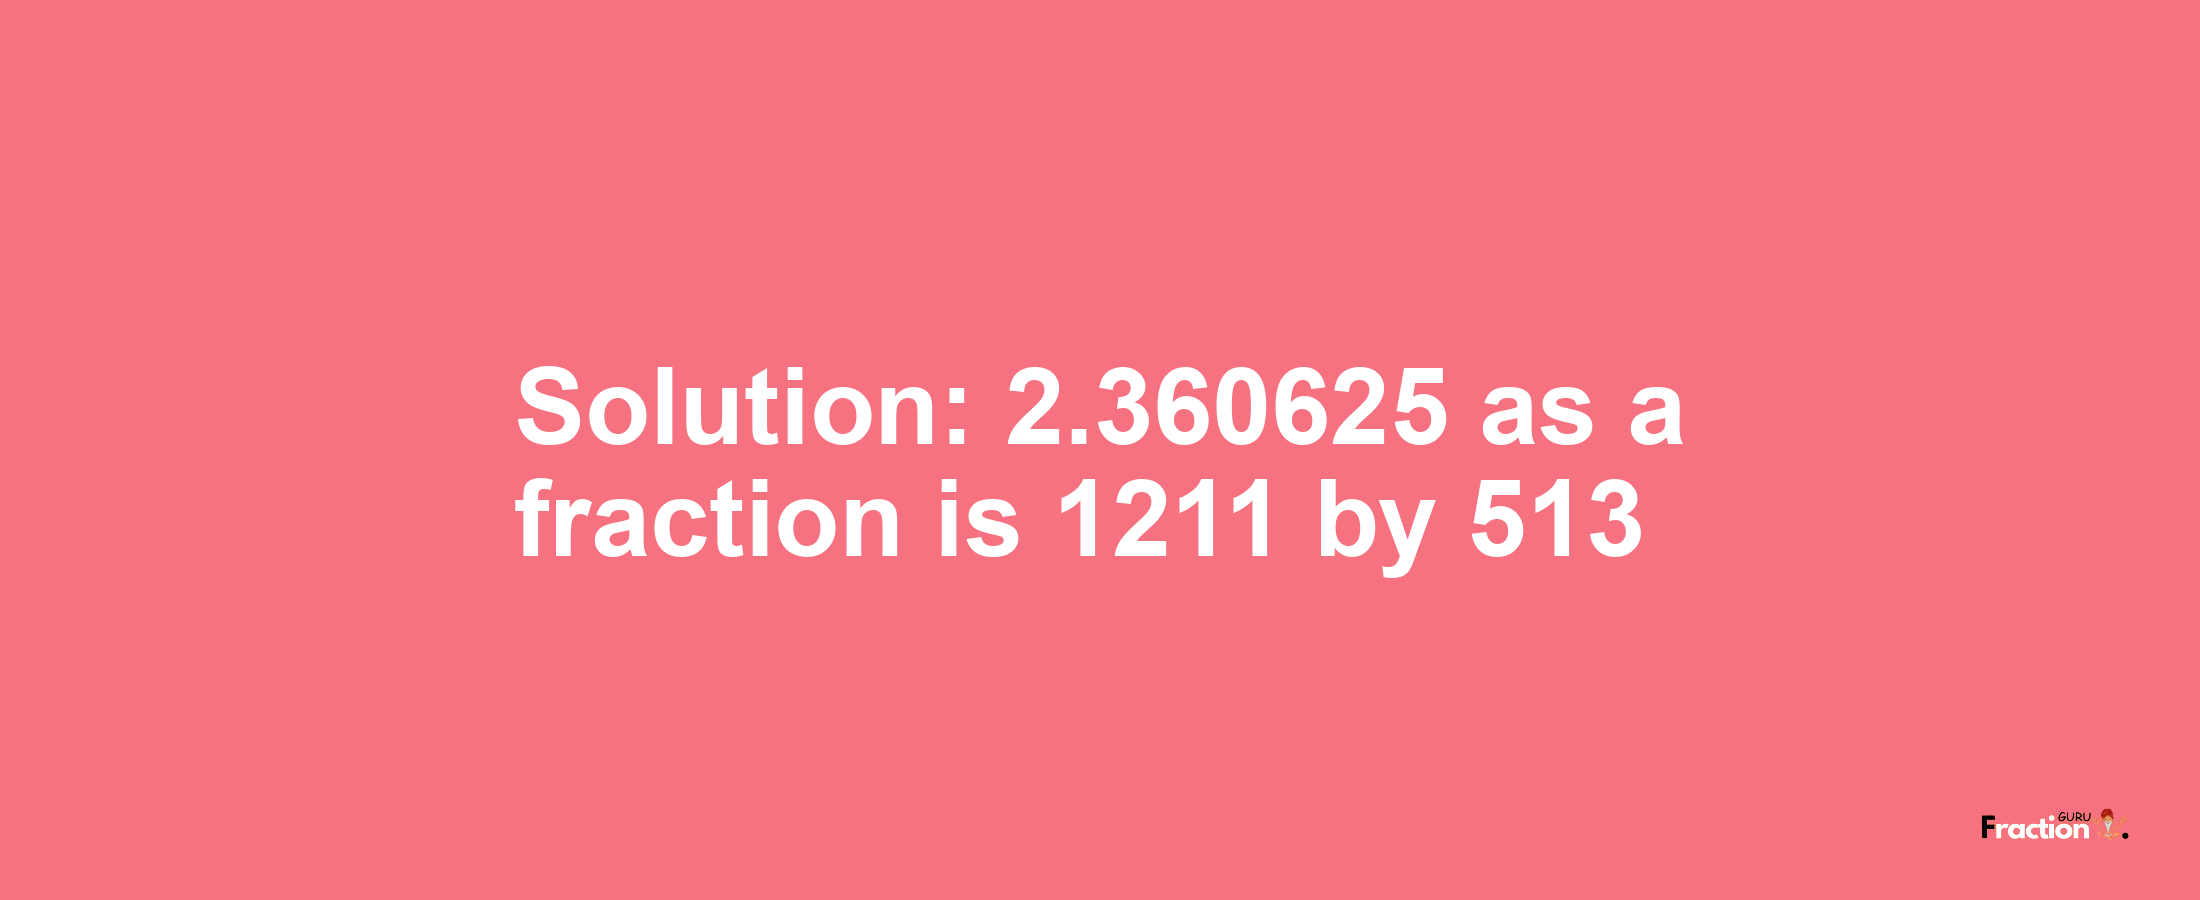 Solution:2.360625 as a fraction is 1211/513